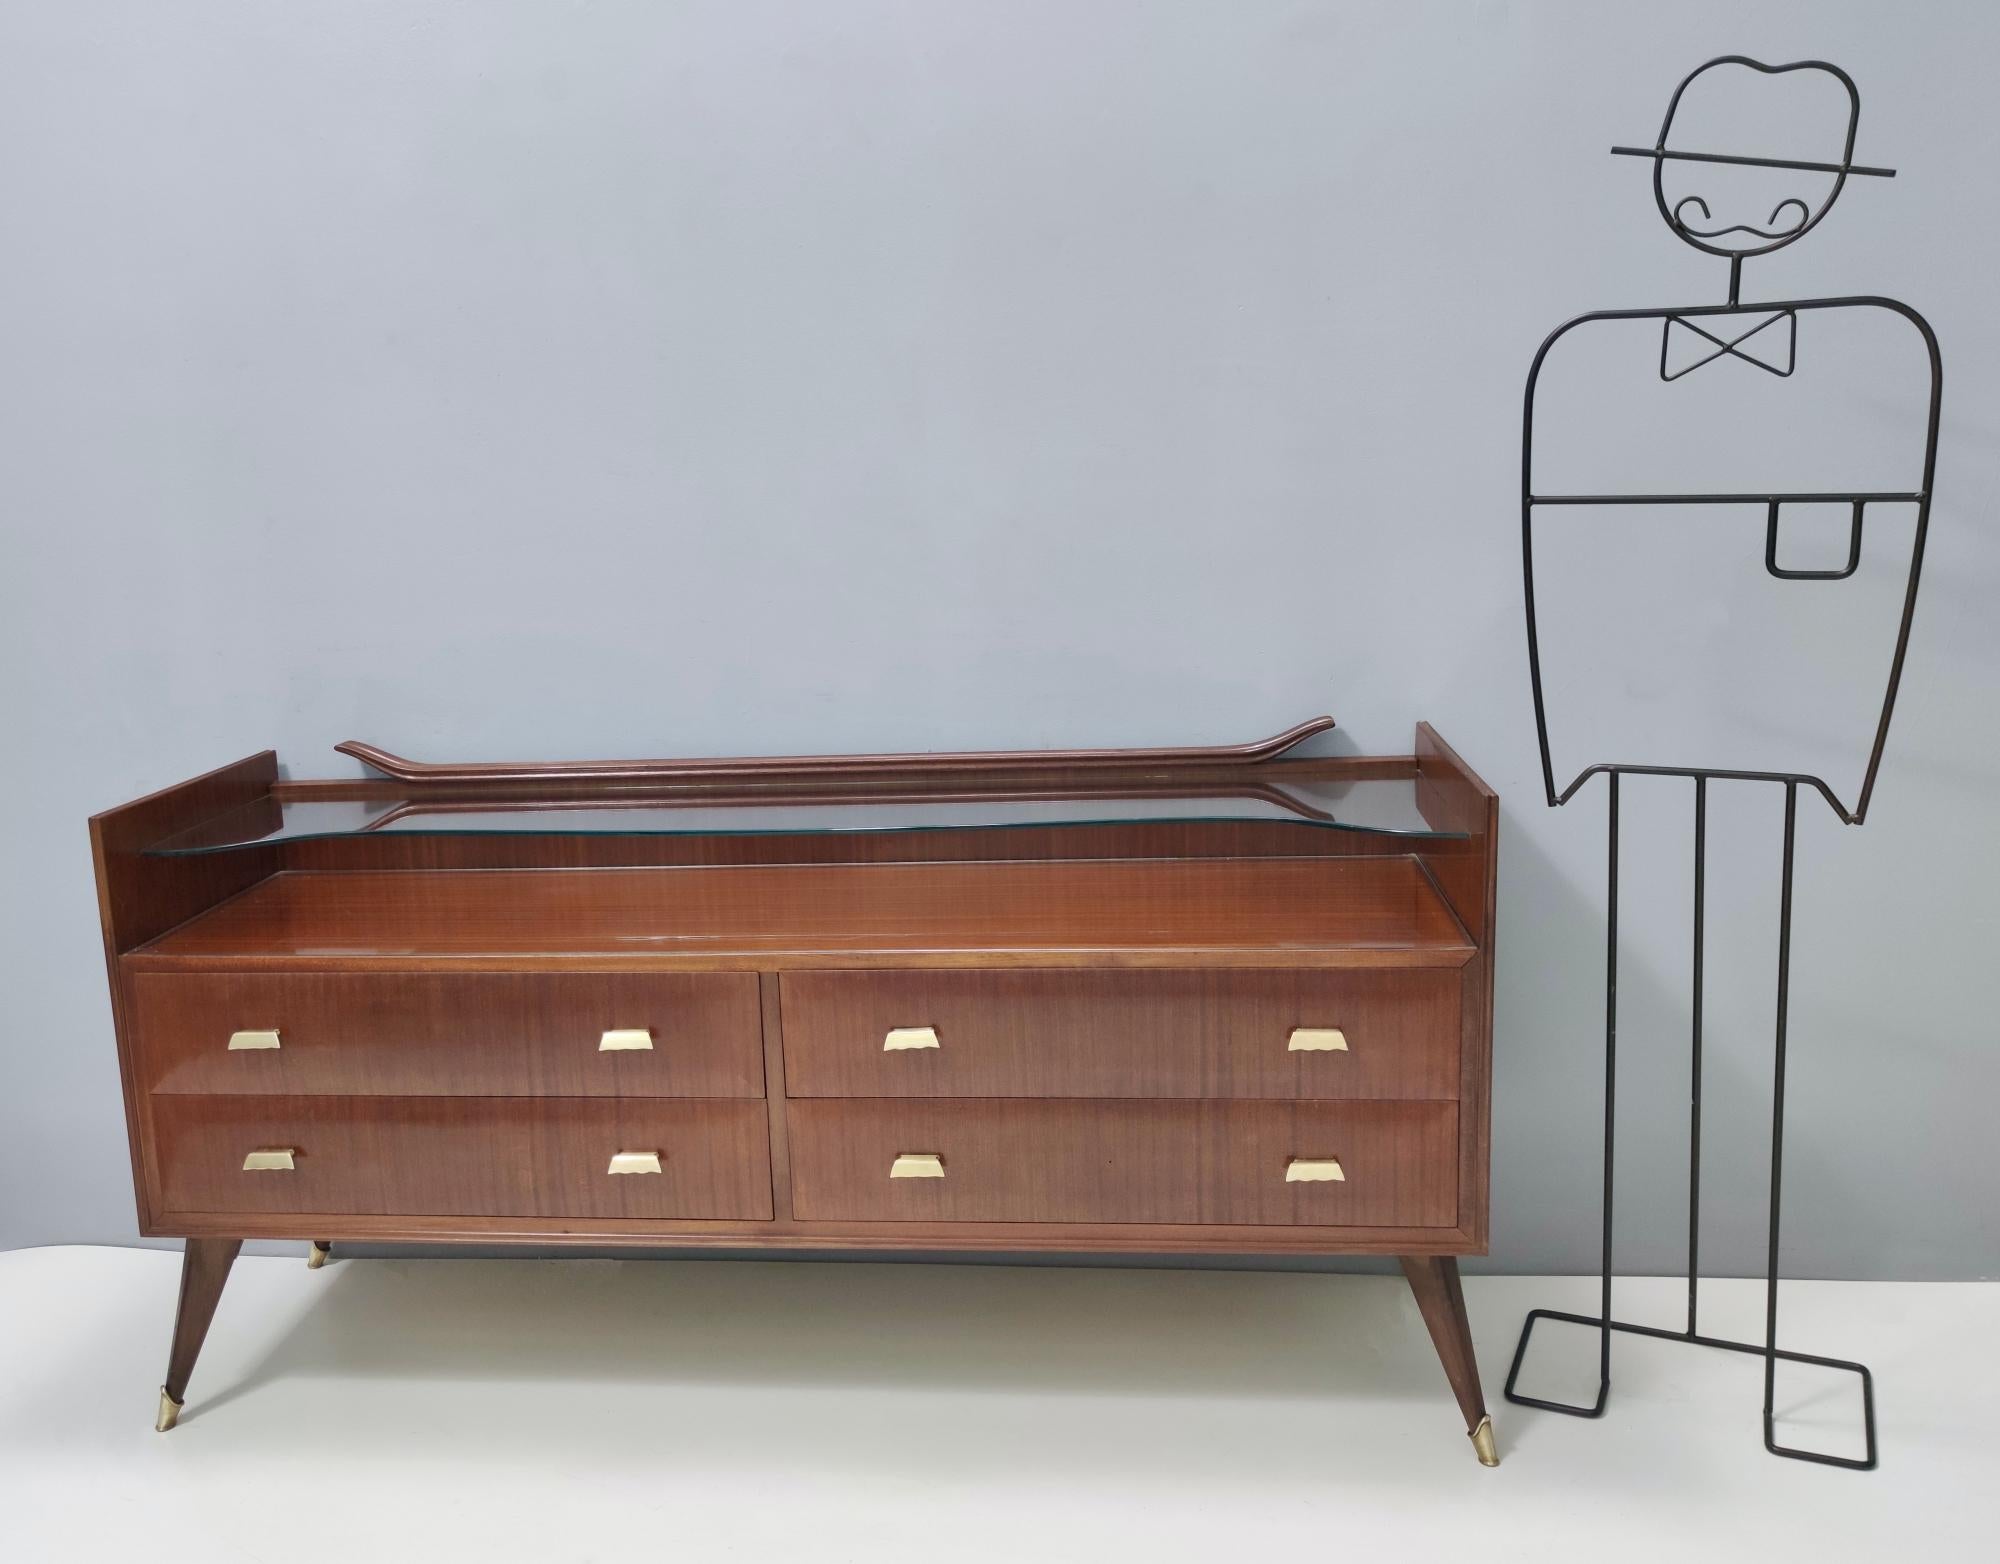 Made in Italy, 1950s. 
This is a high-quality dresser that is made in walnut and features a quite thick glass top and brass handles and feet caps.
It is a vintage piece, therefore it might show slight traces of use, but it can be considered as in